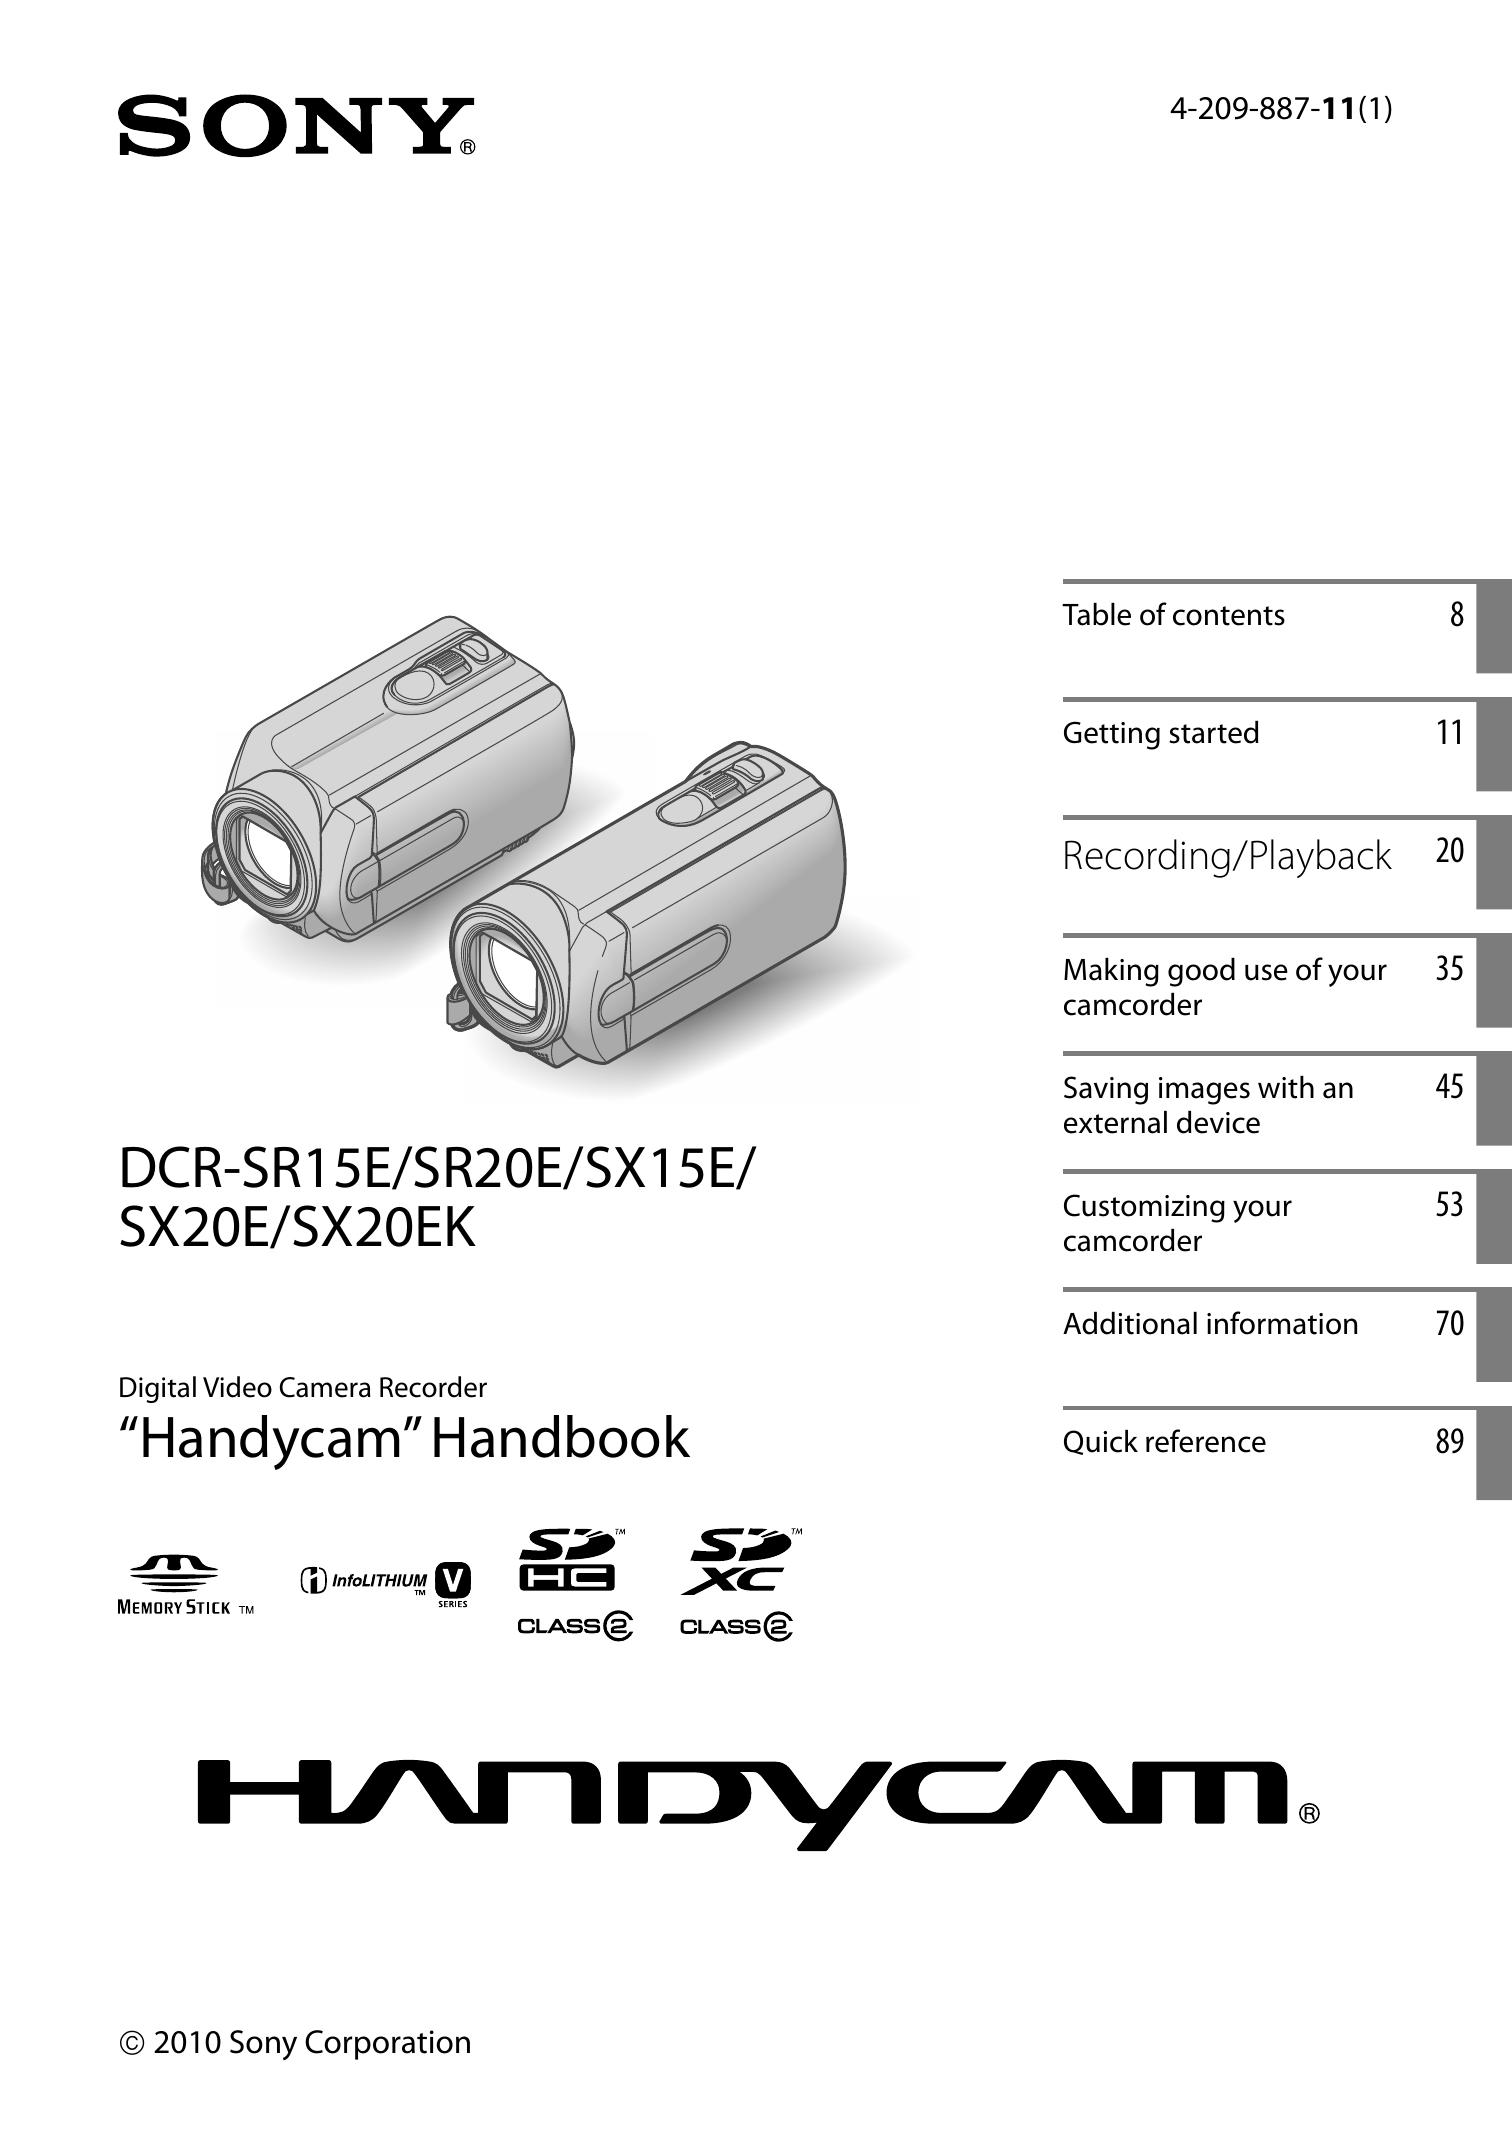 Sony 4-209-887-11(1) Camcorder User Manual